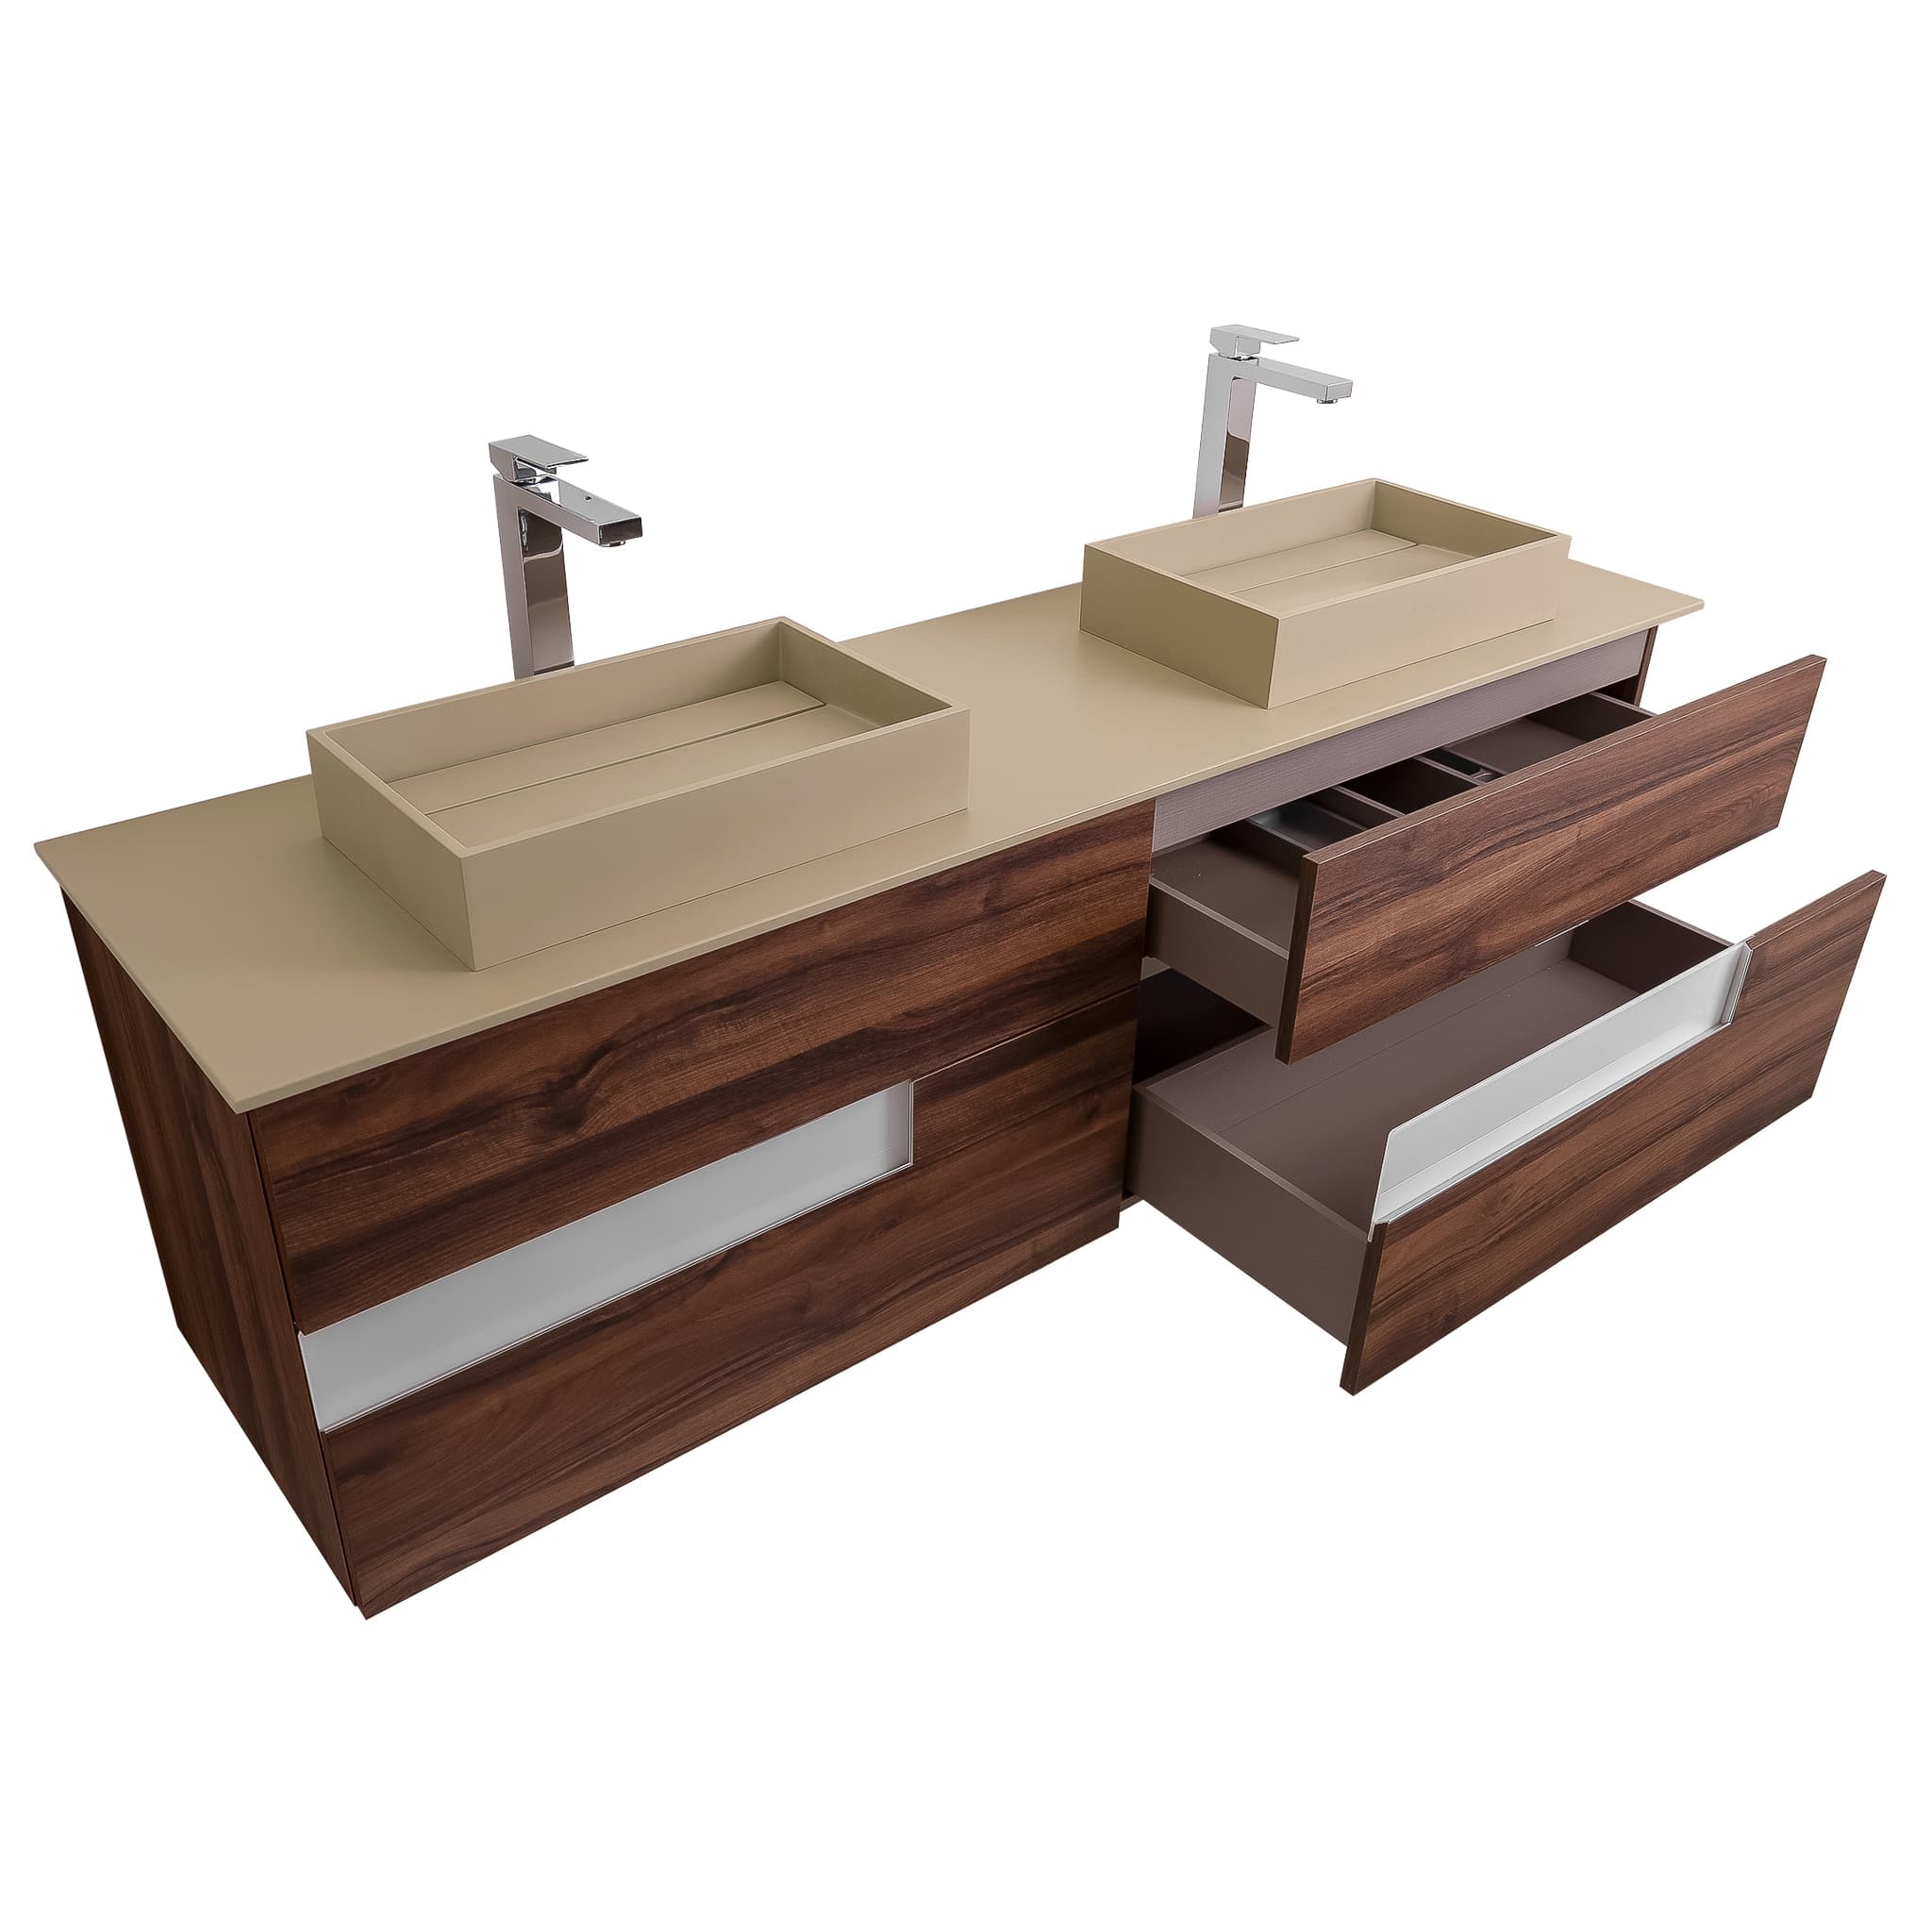 Vision 72 Valenti Medium Brown Wood Cabinet, Solid Surface Flat Taupe Counter And Two Infinity Square Solid Surface Taupe Basin 1329, Wall Mounted Modern Vanity Set